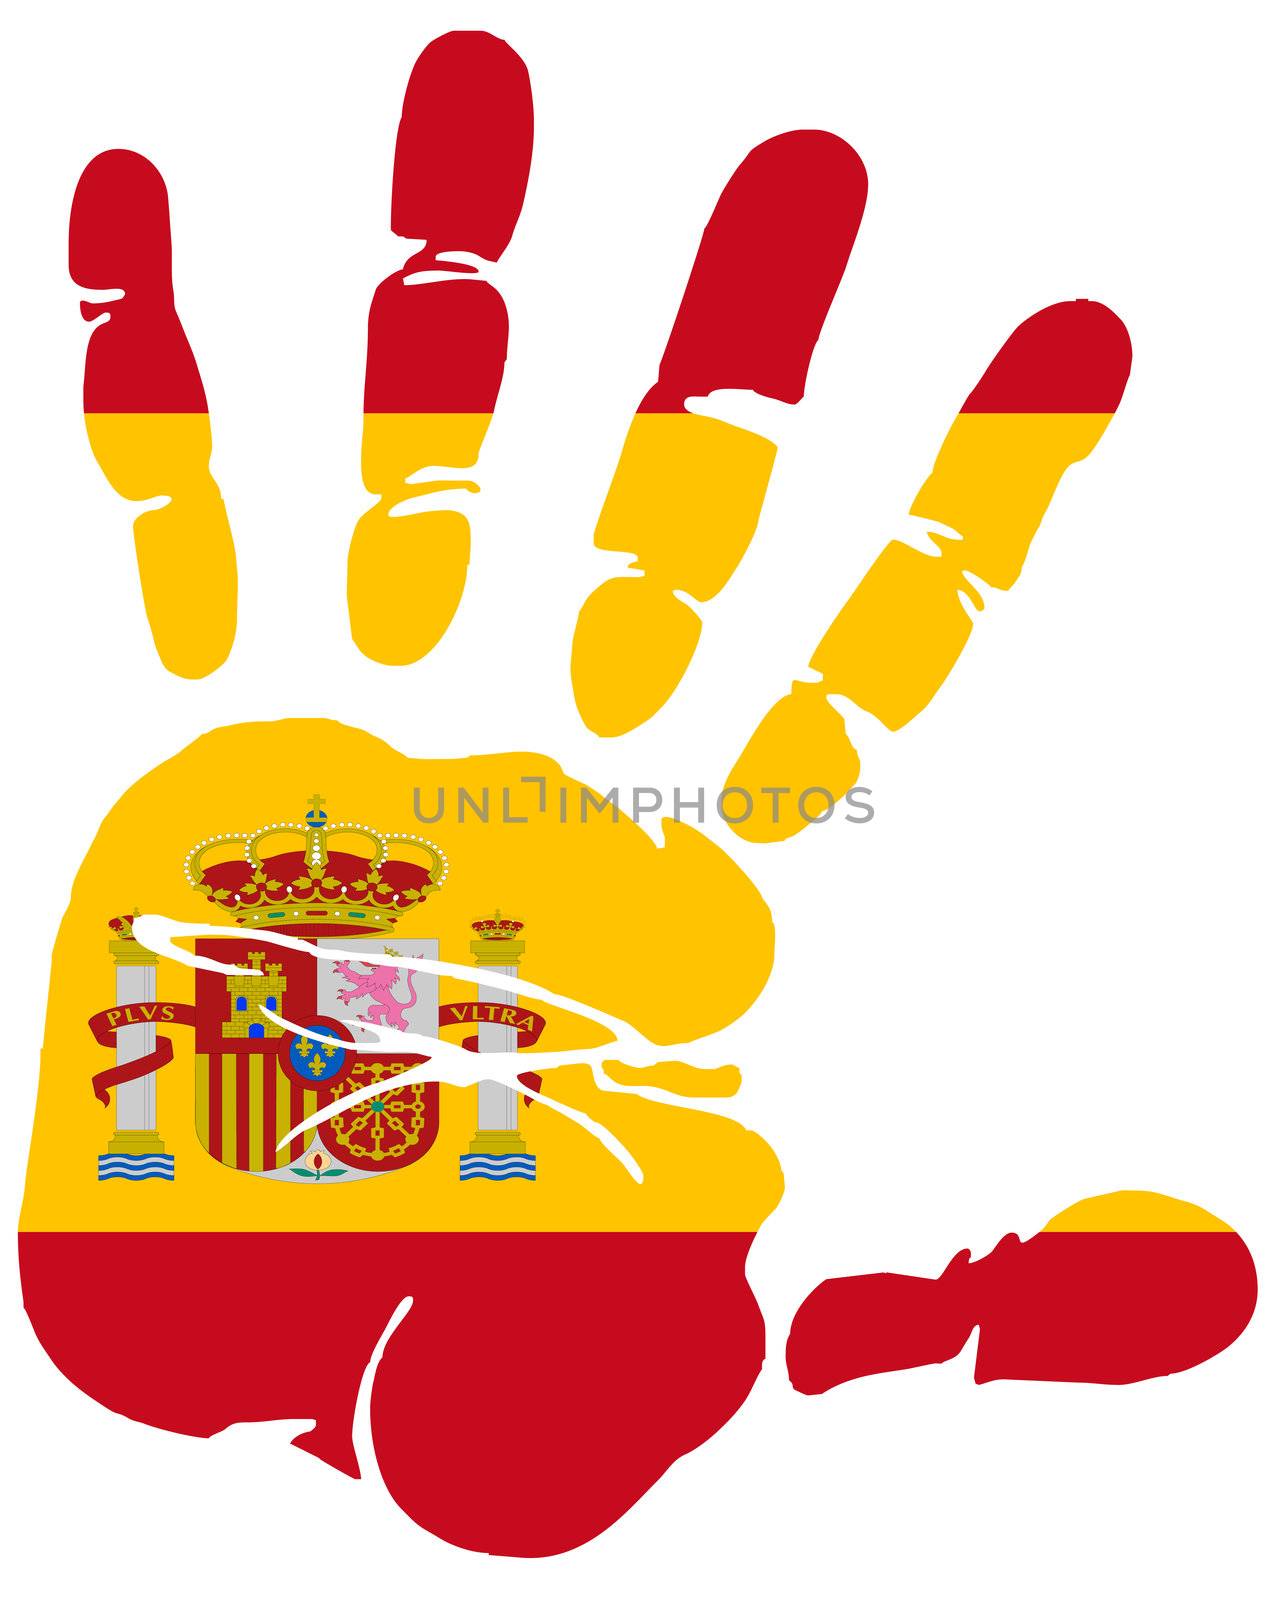 Hand print of Spain flag colors